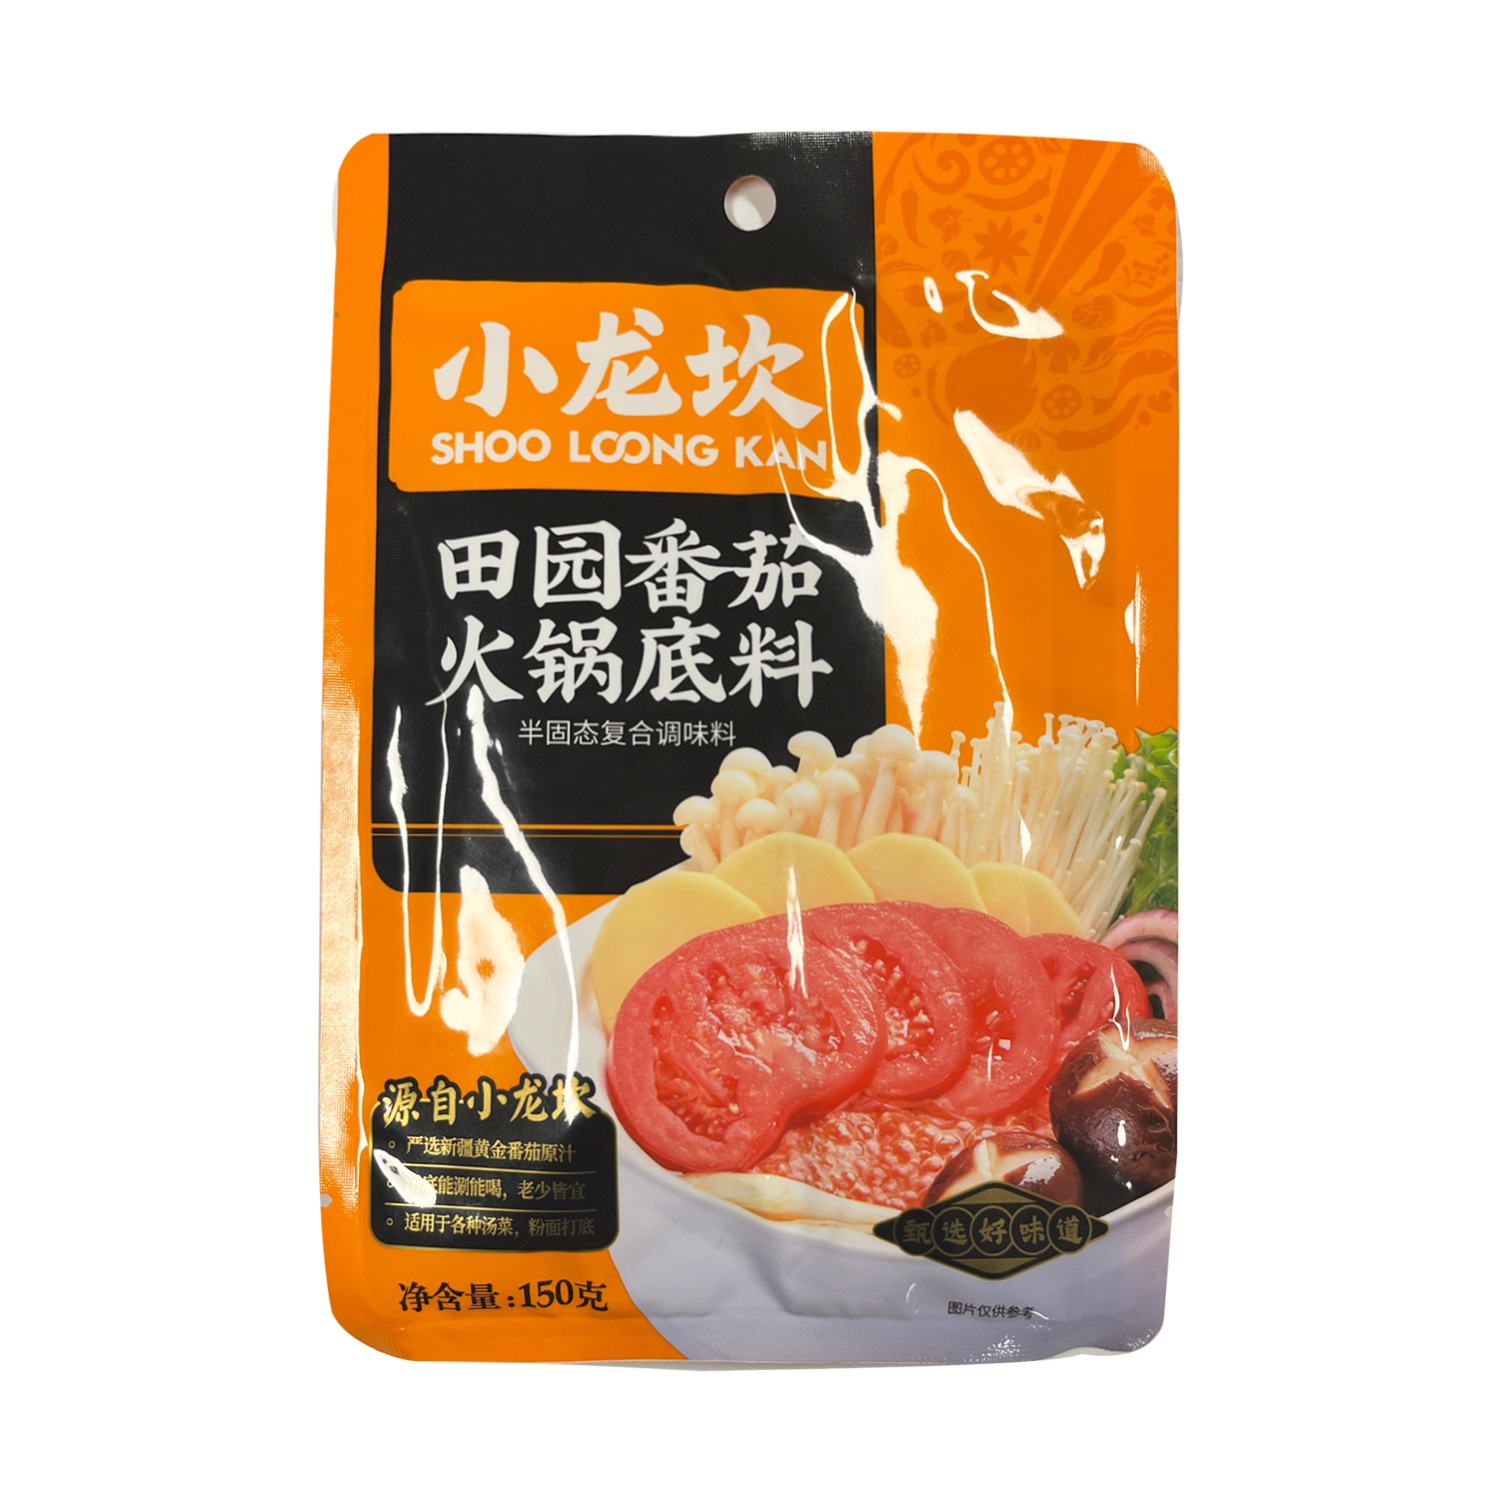 Shoo Loong Kan Hotpot Base Tomato Flavour 150g-eBest-Hotpot & BBQ,Pantry